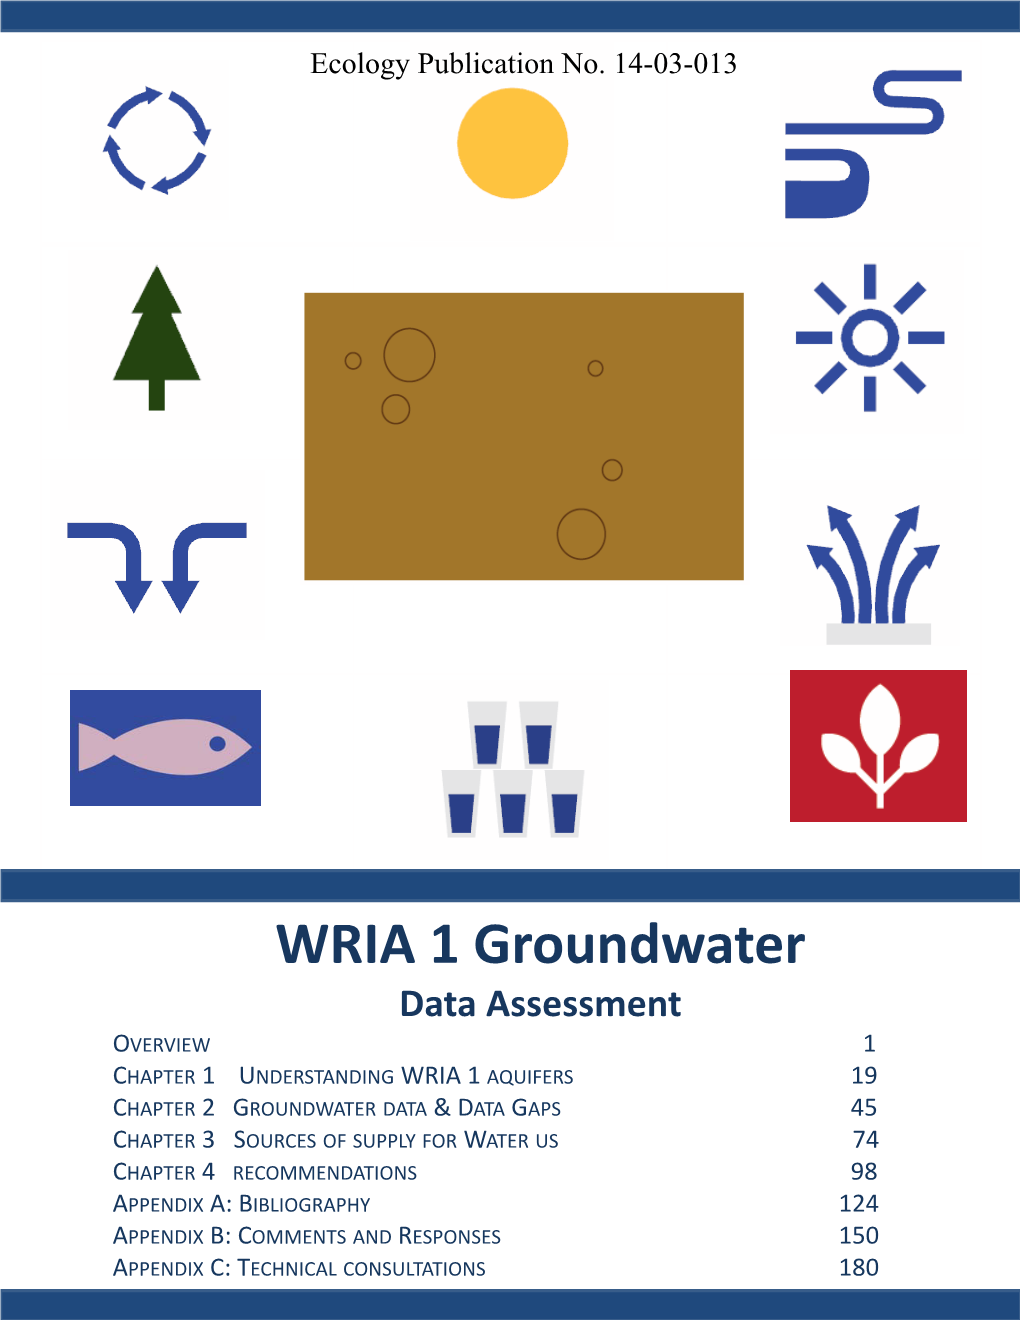 WRIA 1 Groundwater Data Assessment